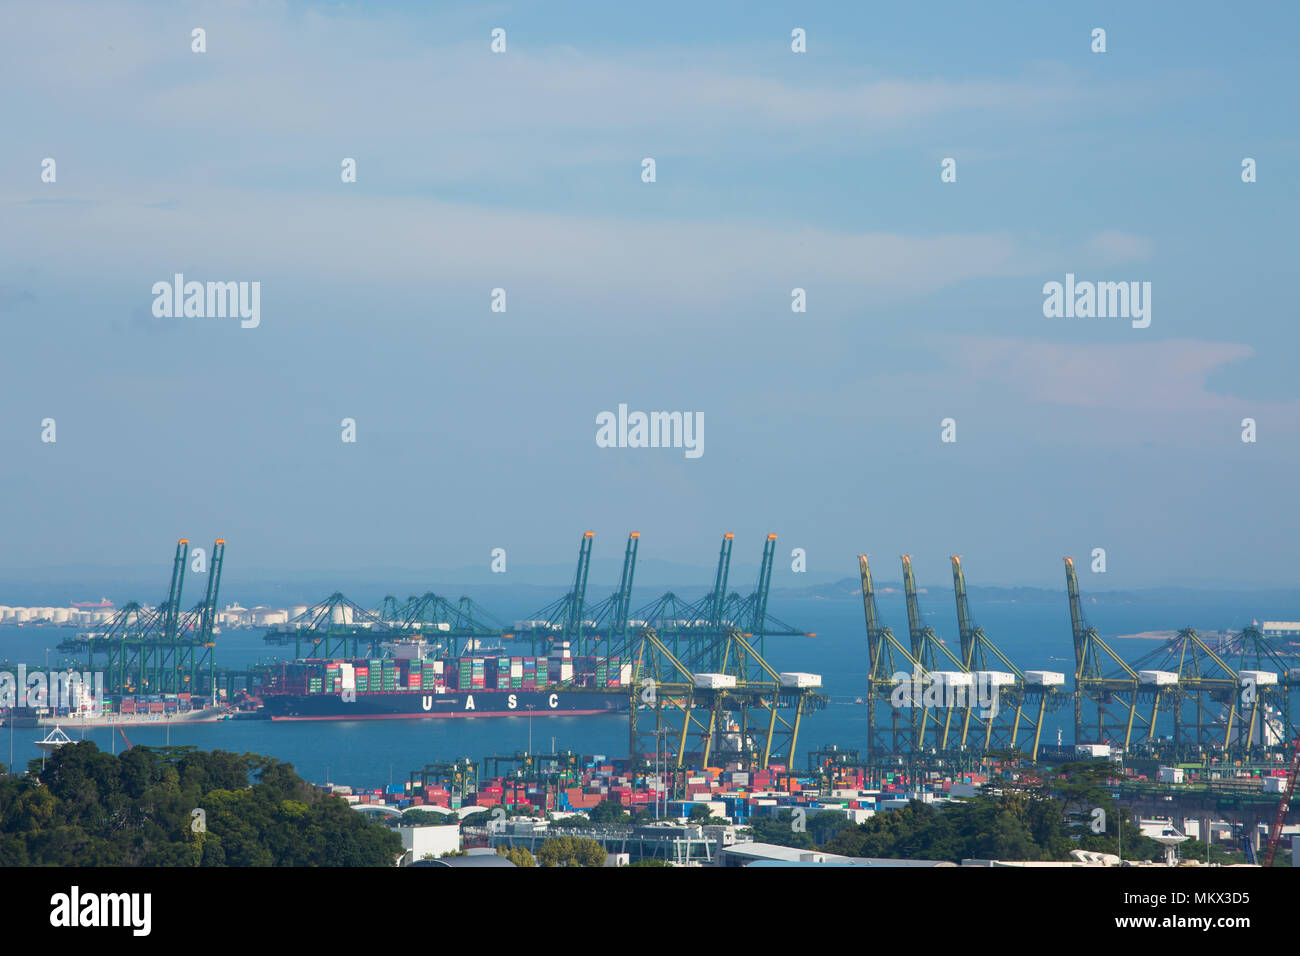 View of Singapore port in the western part of Singapore Stock Photo